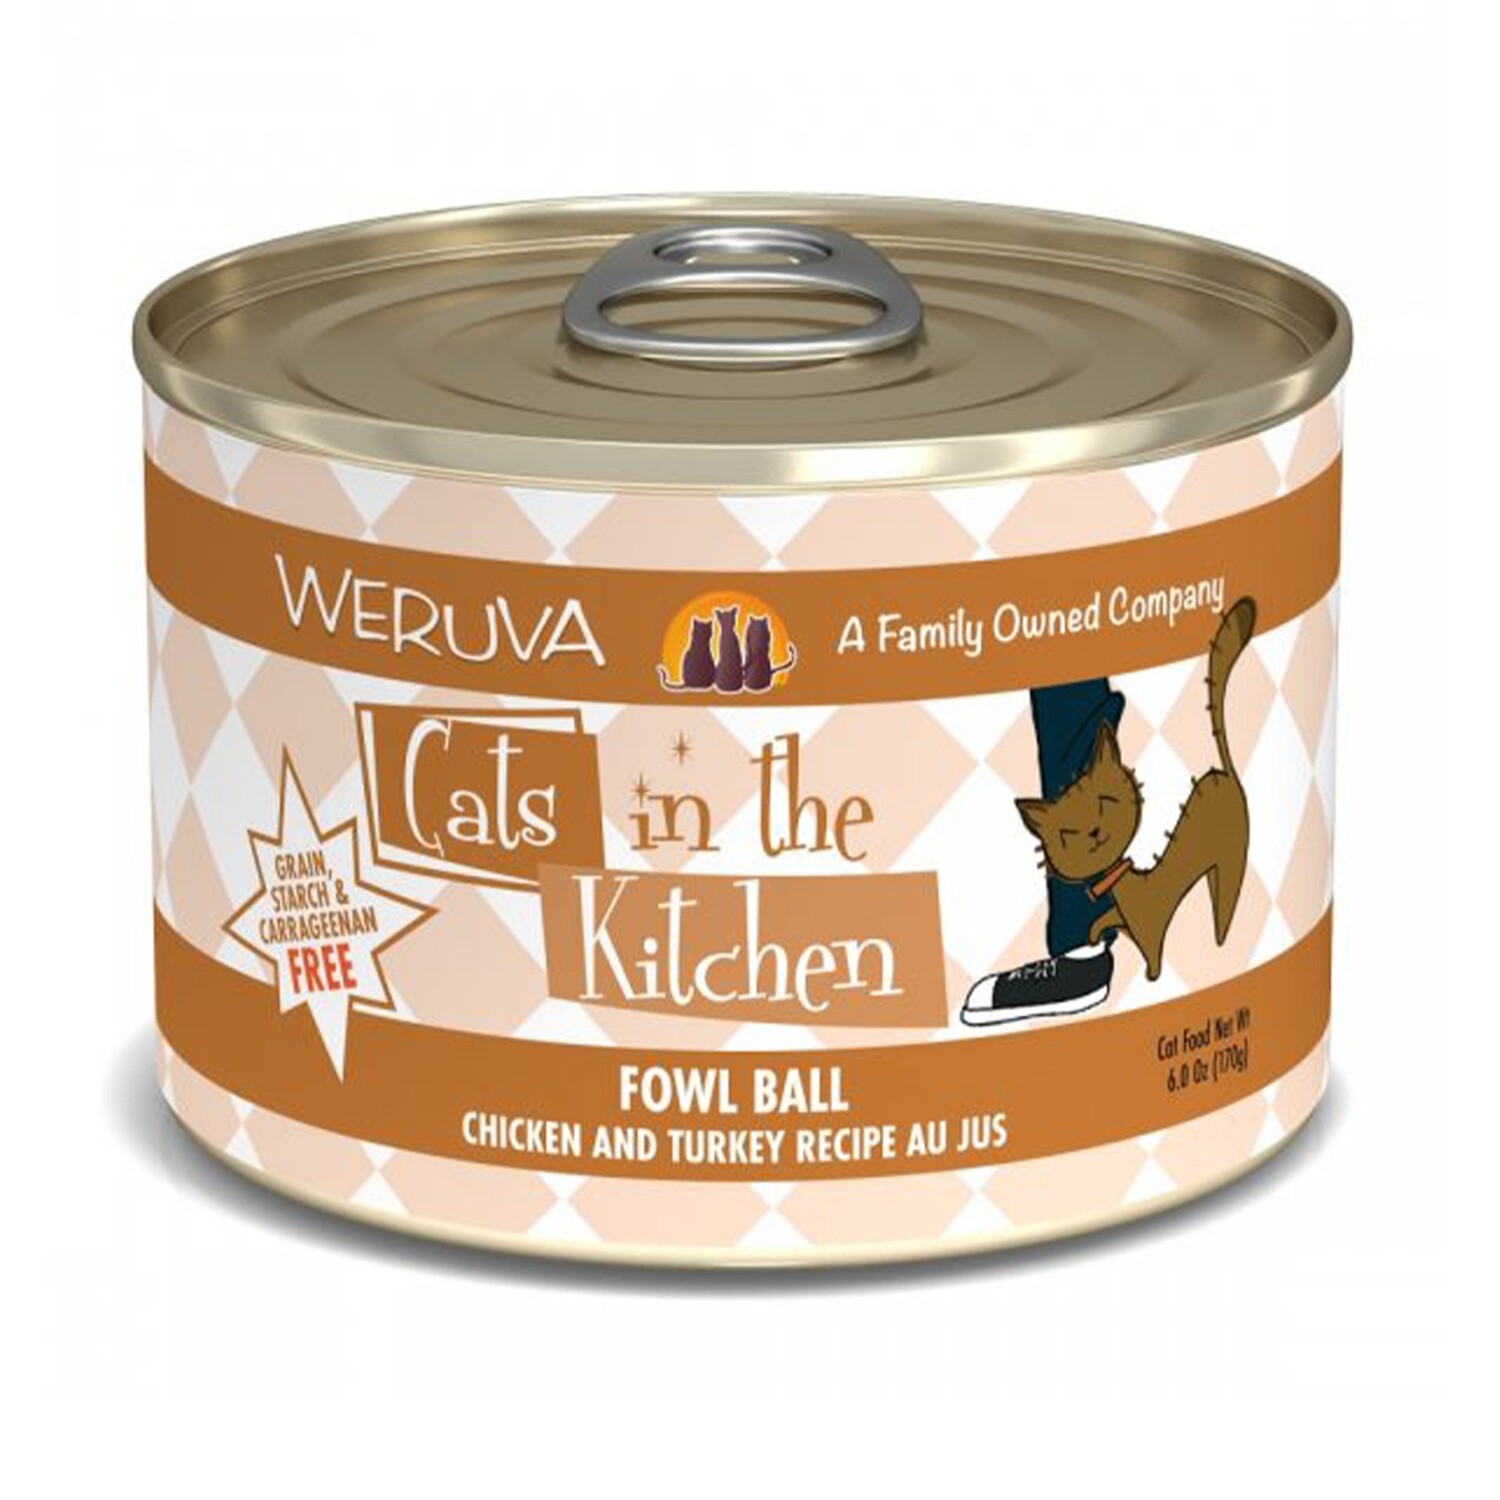 Weruva Cats in the Kitchen Fowl Ball Canned Cat Food Package